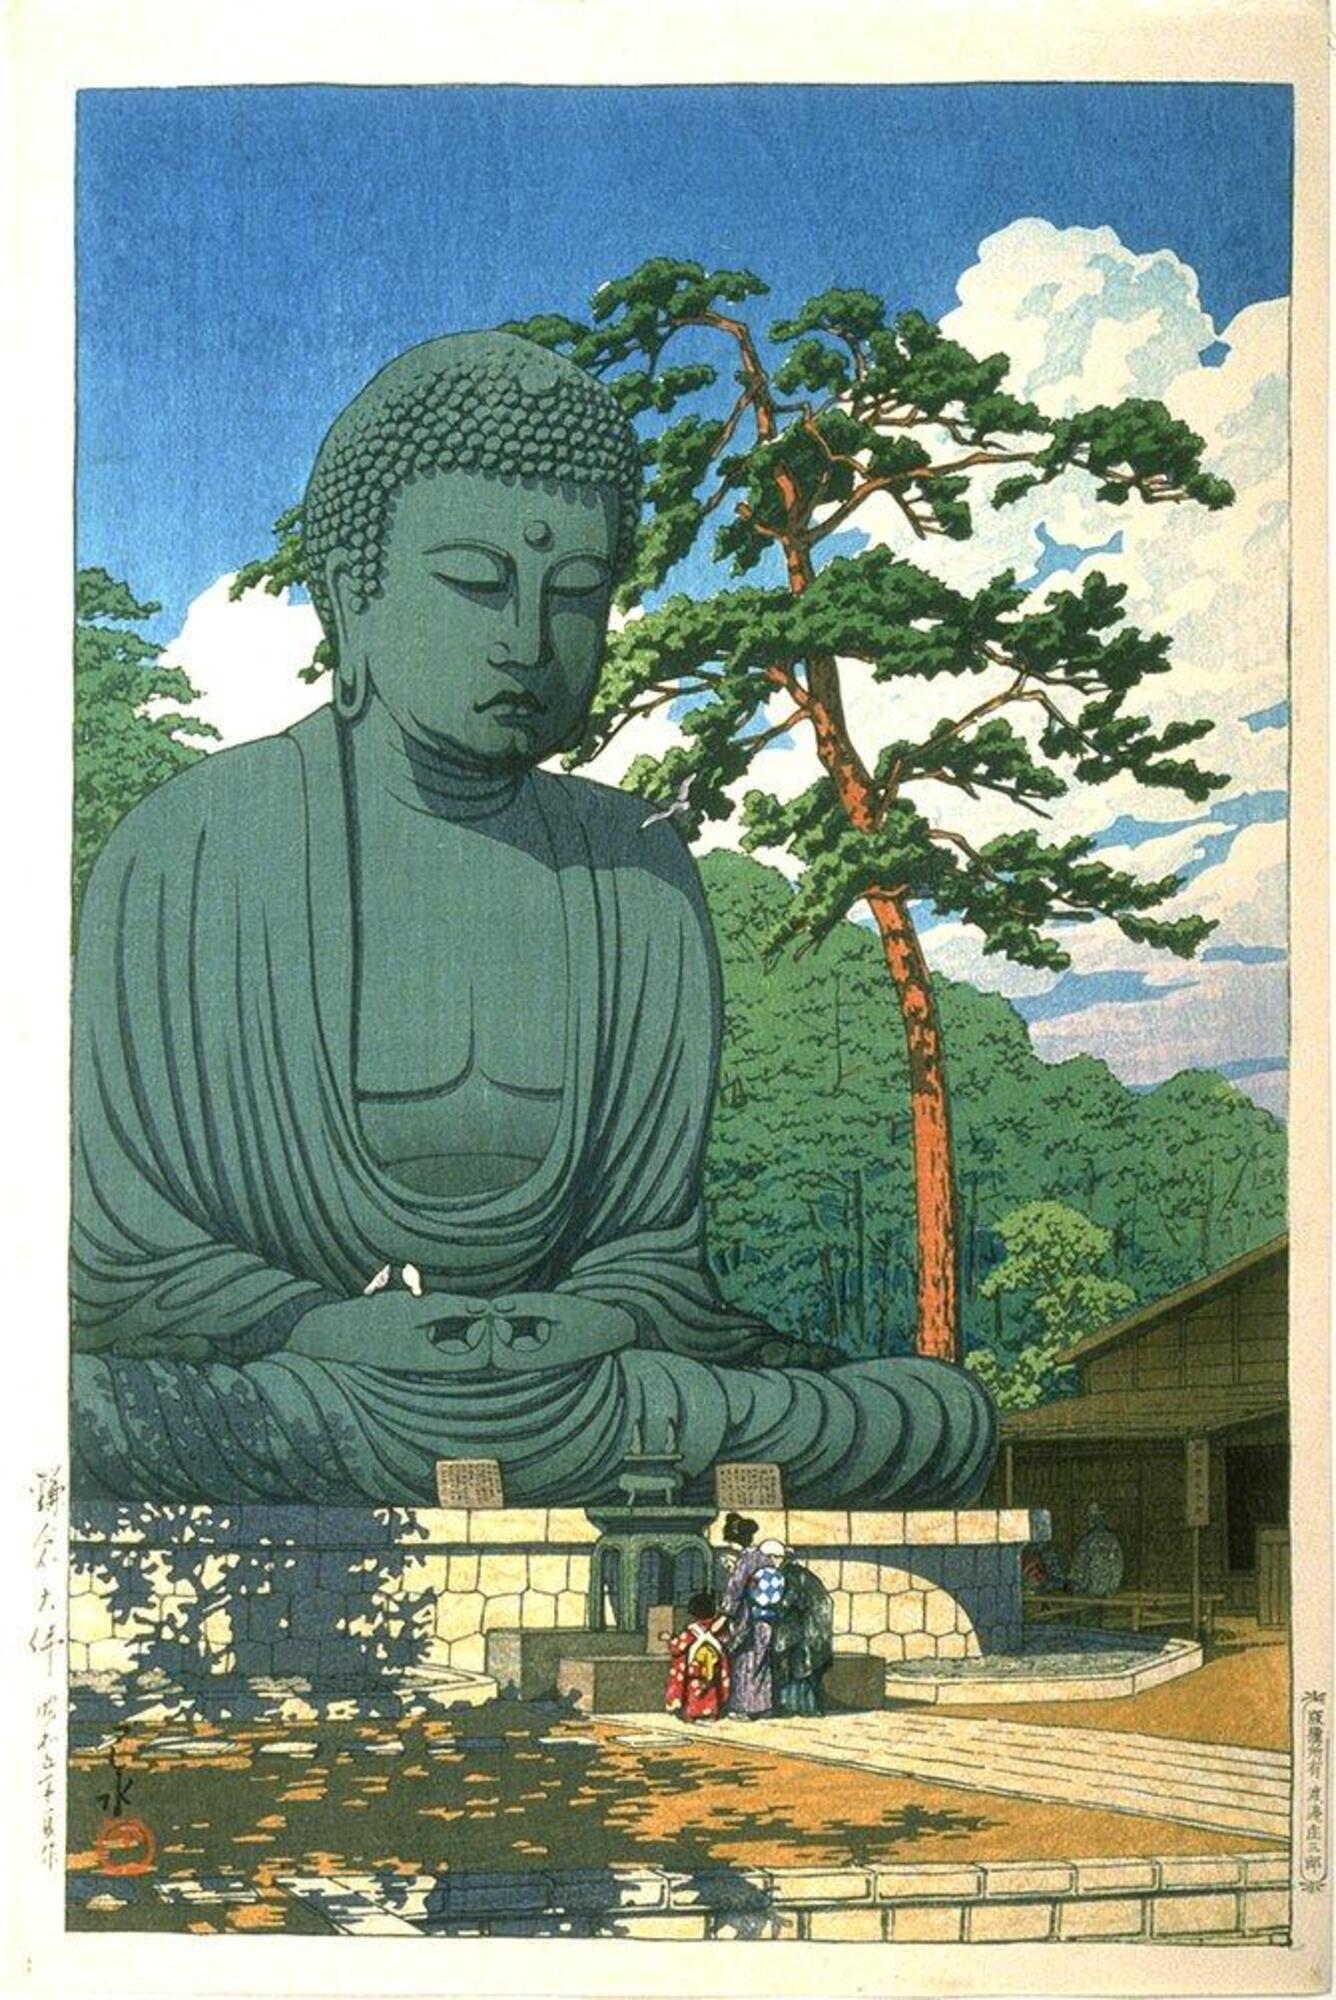 The daibutsu, or giant buddha, statue takes up the bulk of the pictorial space. Curving upwards and towards the statue is a large pine. At the feet of the green hued daibutsu statue are three women of different generations: a young girl, an adult woman, and an elderly woman. Although a few clouds hover in the sky, the sun appears to be shining brightly, casting some shadows of nearby trees into the picture.